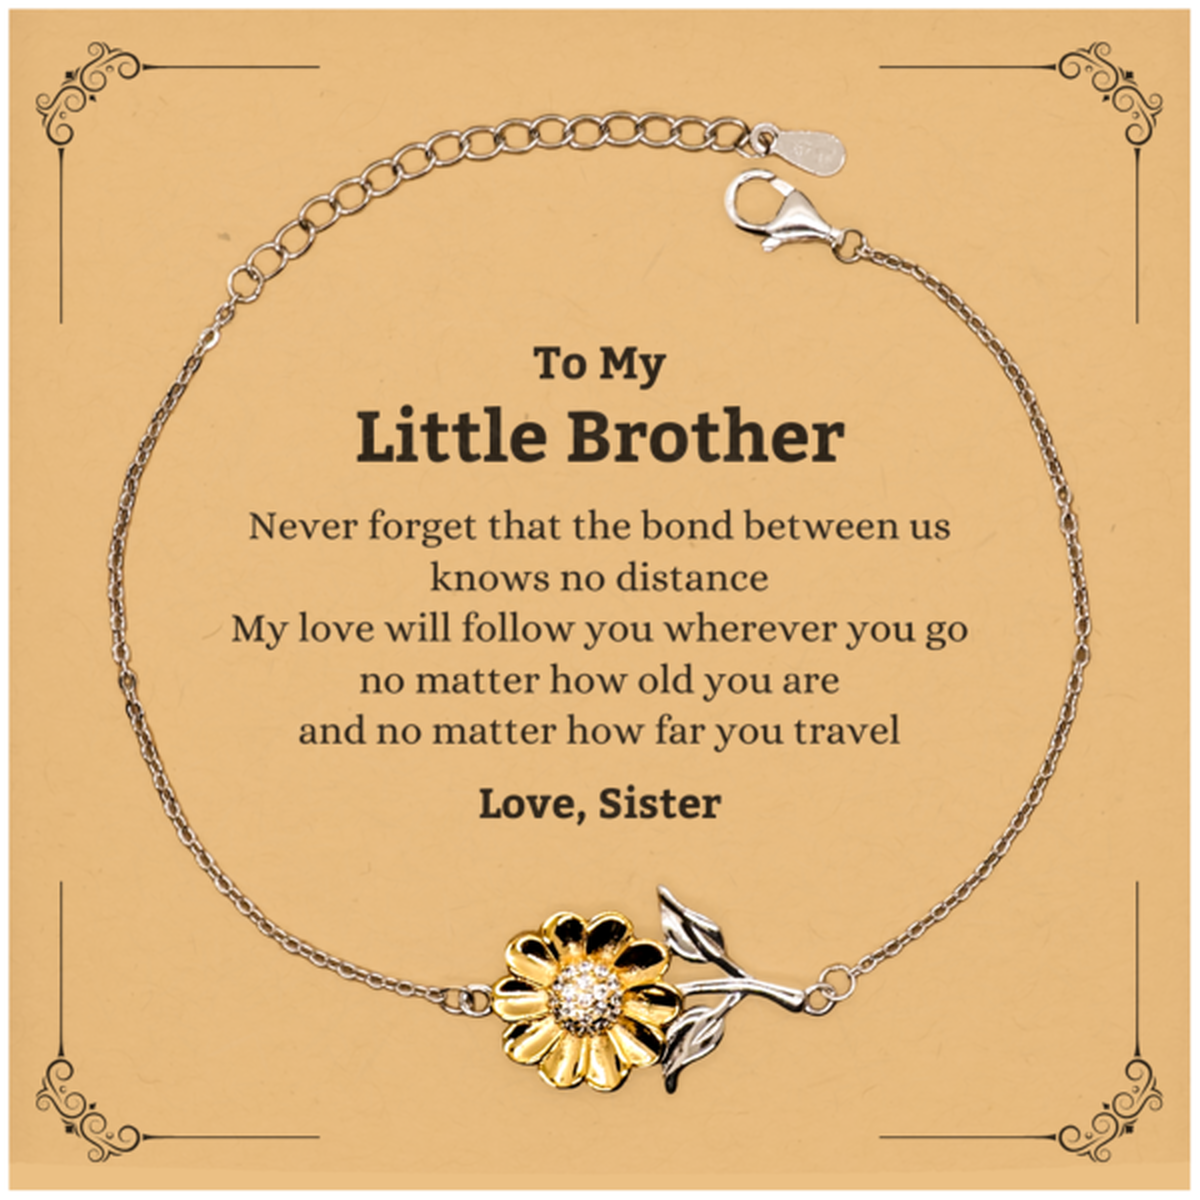 Little Brother Birthday Gifts from Sister, Adjustable Sunflower Bracelet for Little Brother Christmas Graduation Unique Gifts Little Brother Never forget that the bond between us knows no distance. Love, Sister